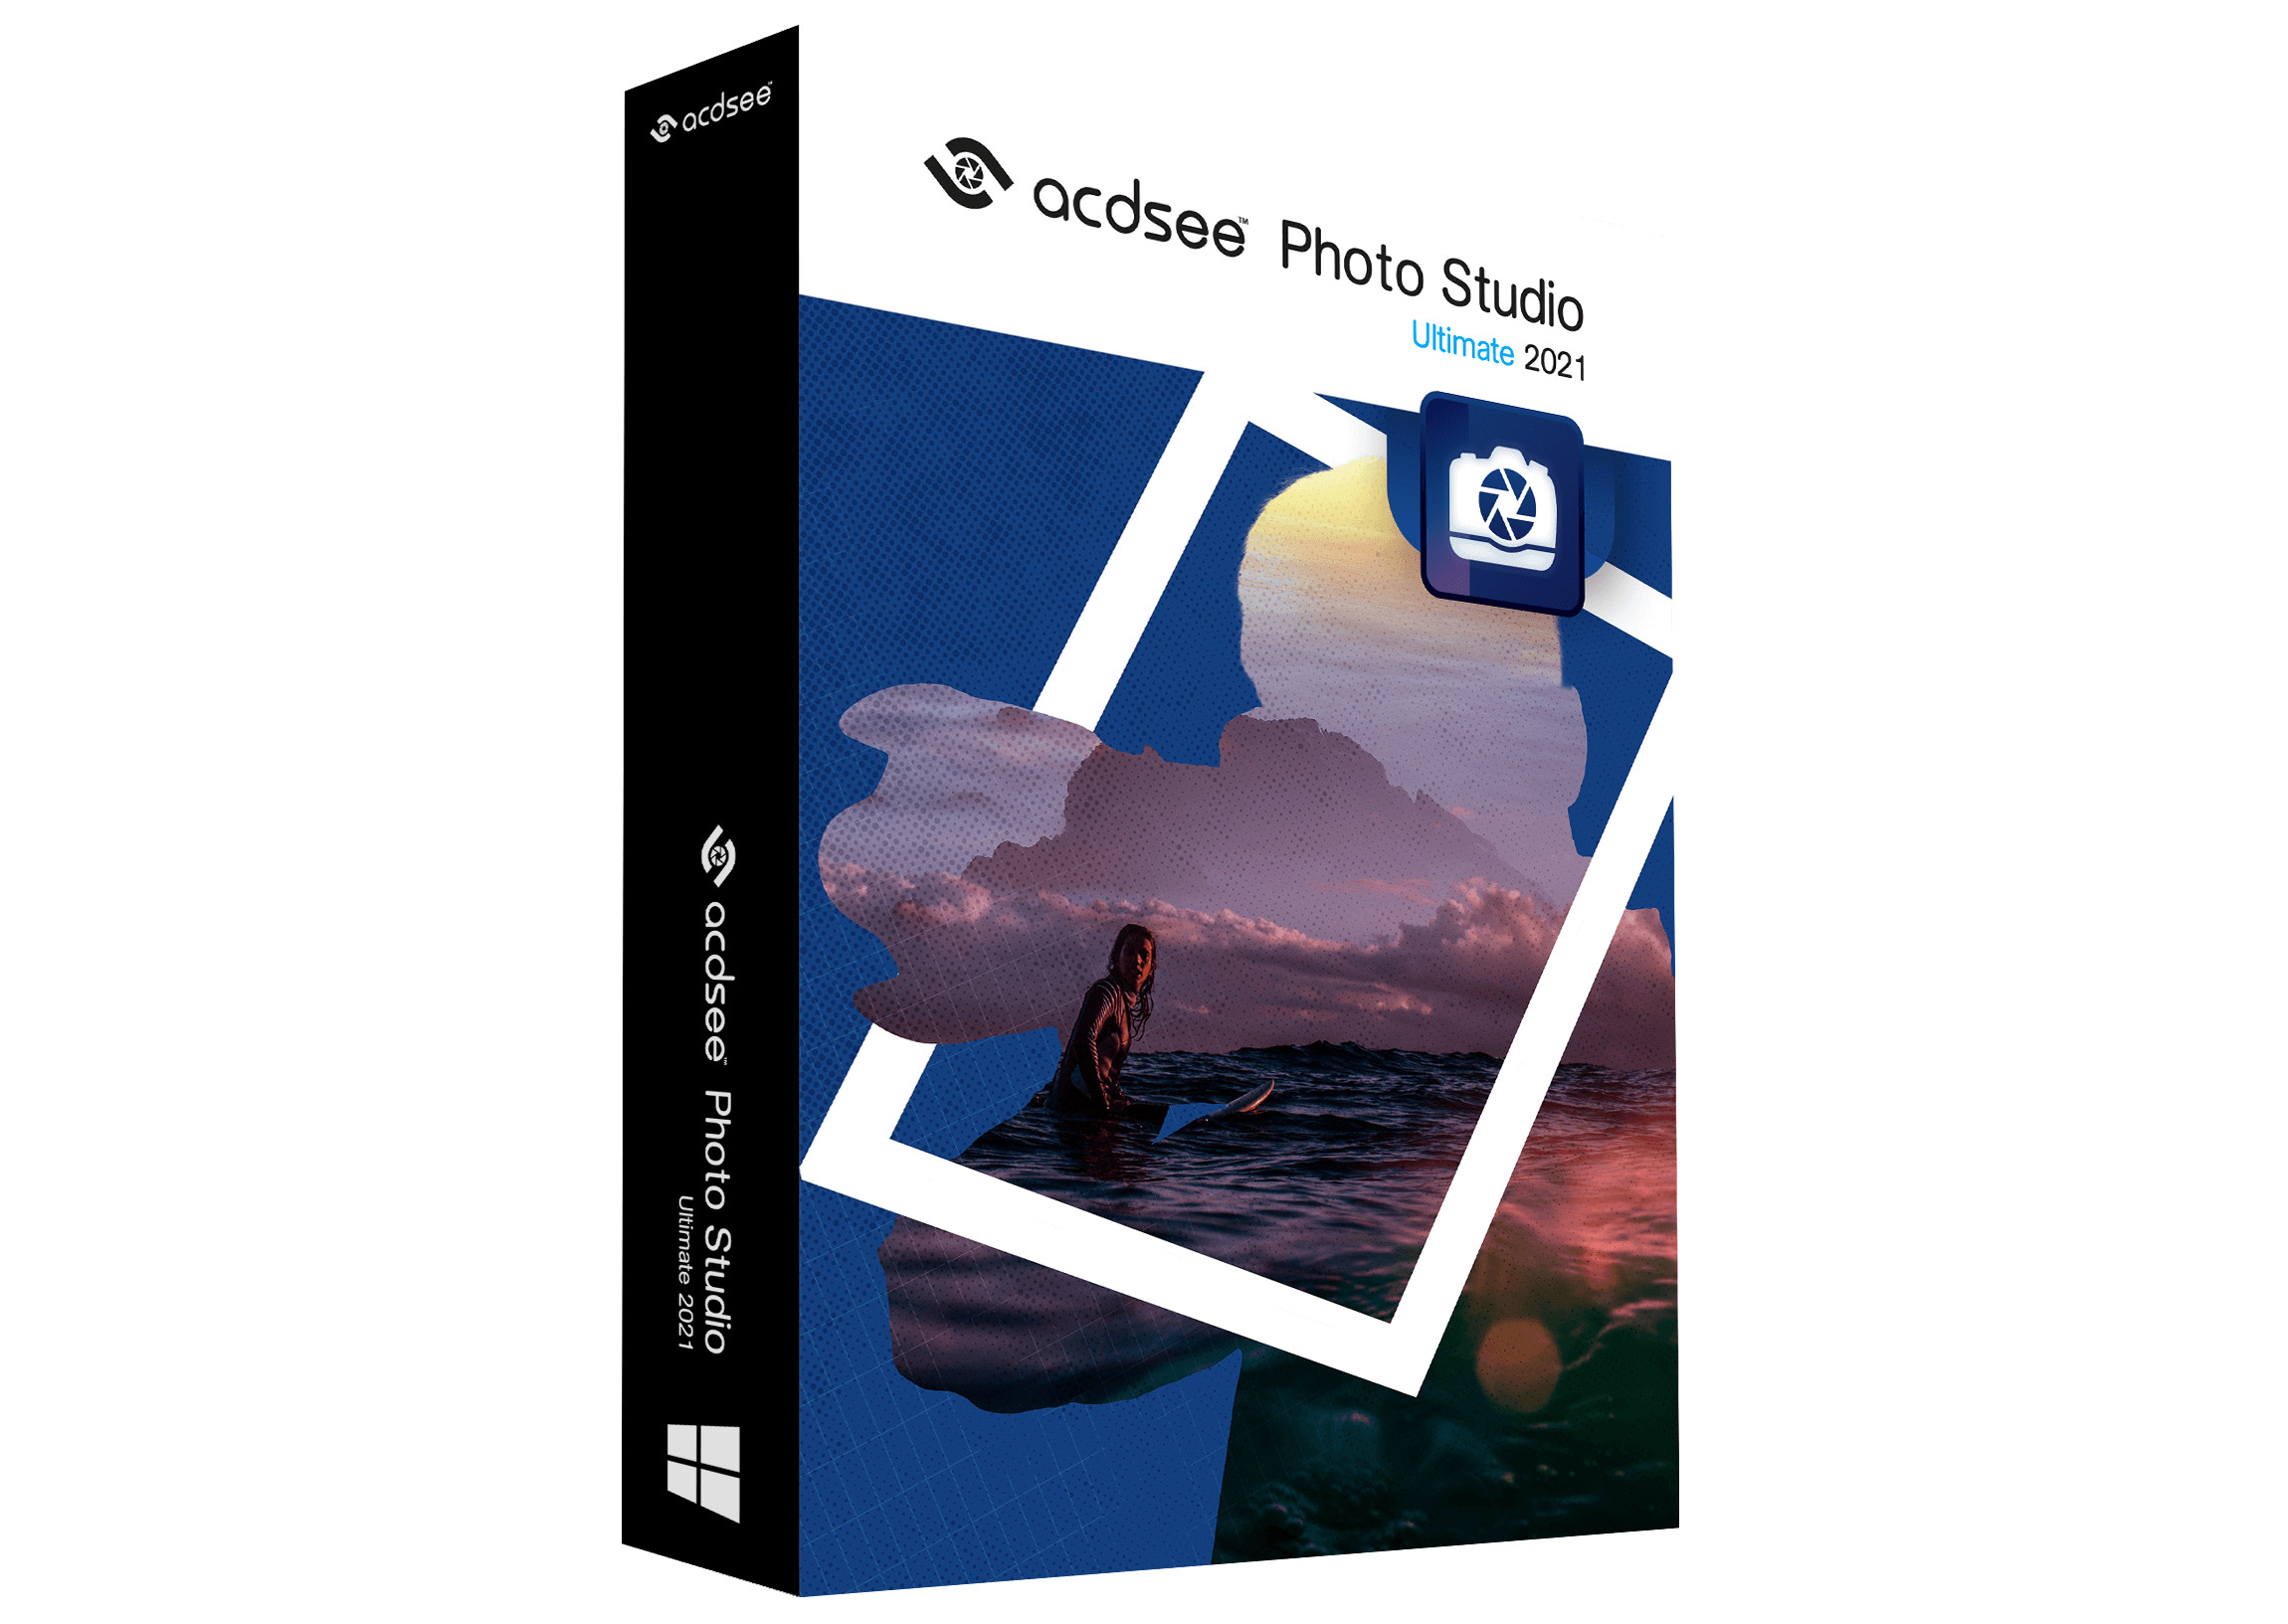 (11.29$) ACDSee Photo Studio Ultimate 2021 Key (6 Months / 1 PC)